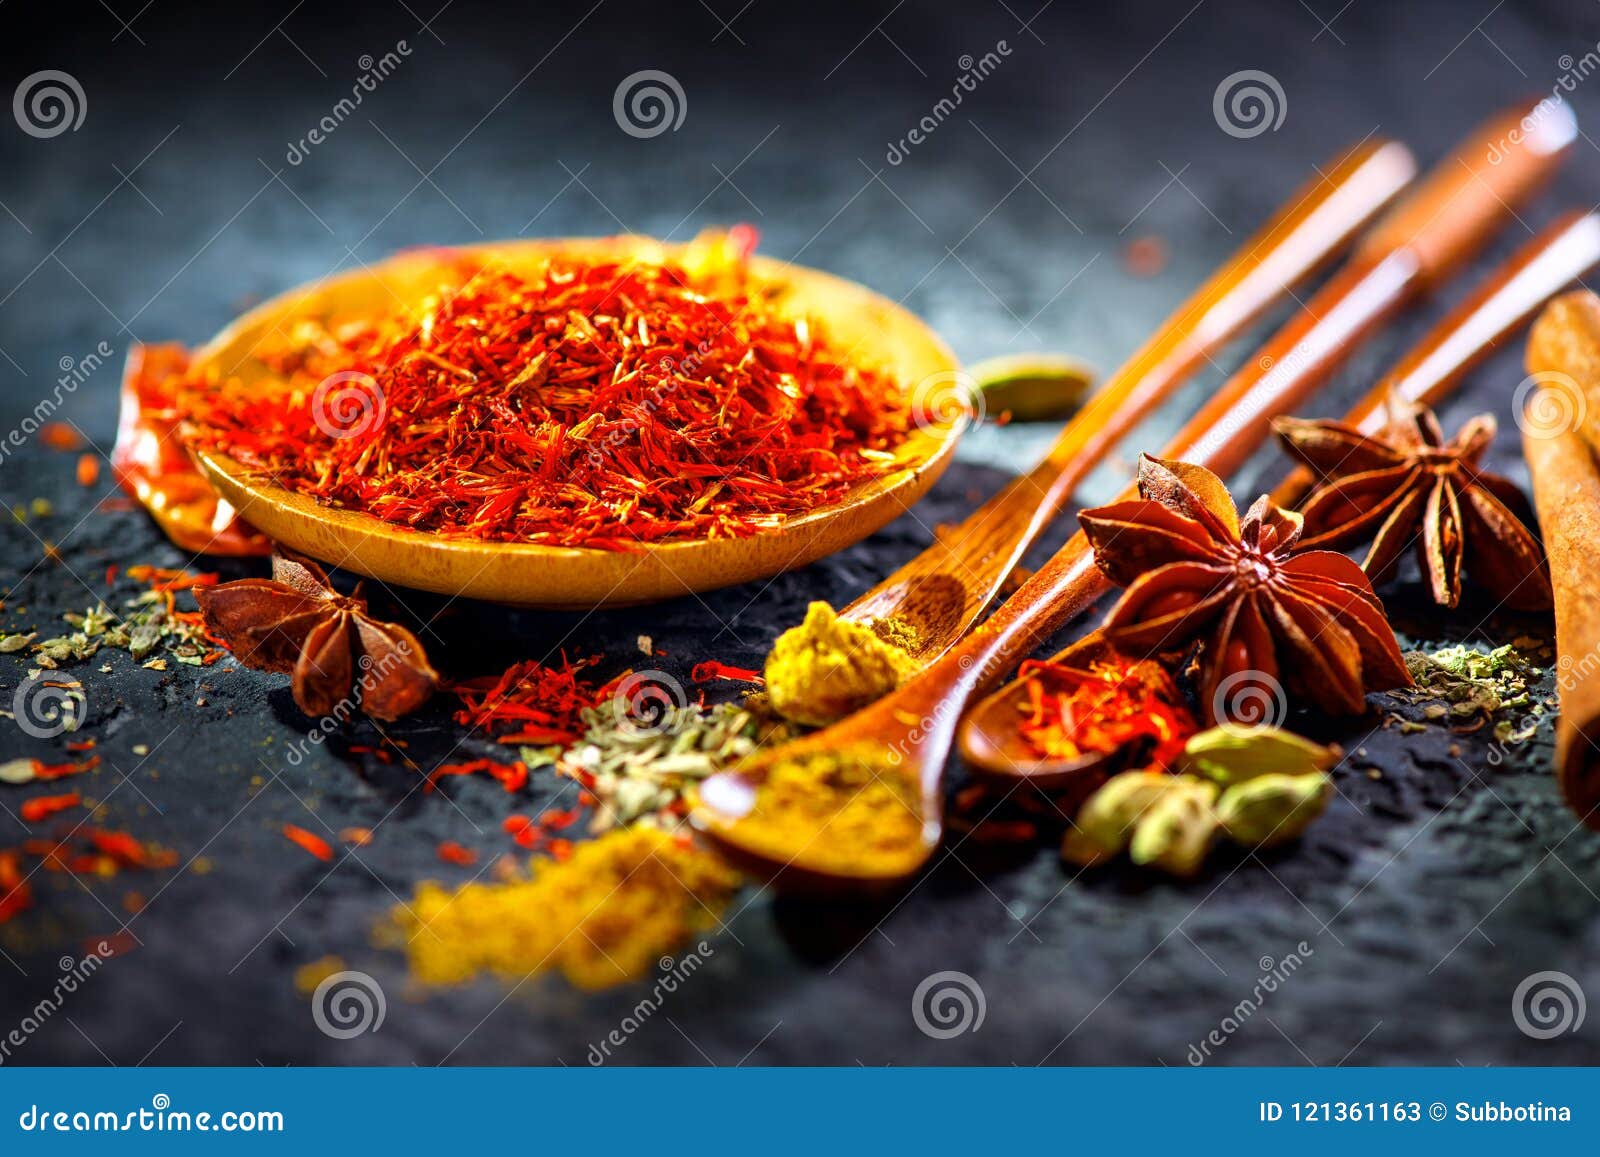 saffron. various indian spices on black stone table. spice and herbs on slate background